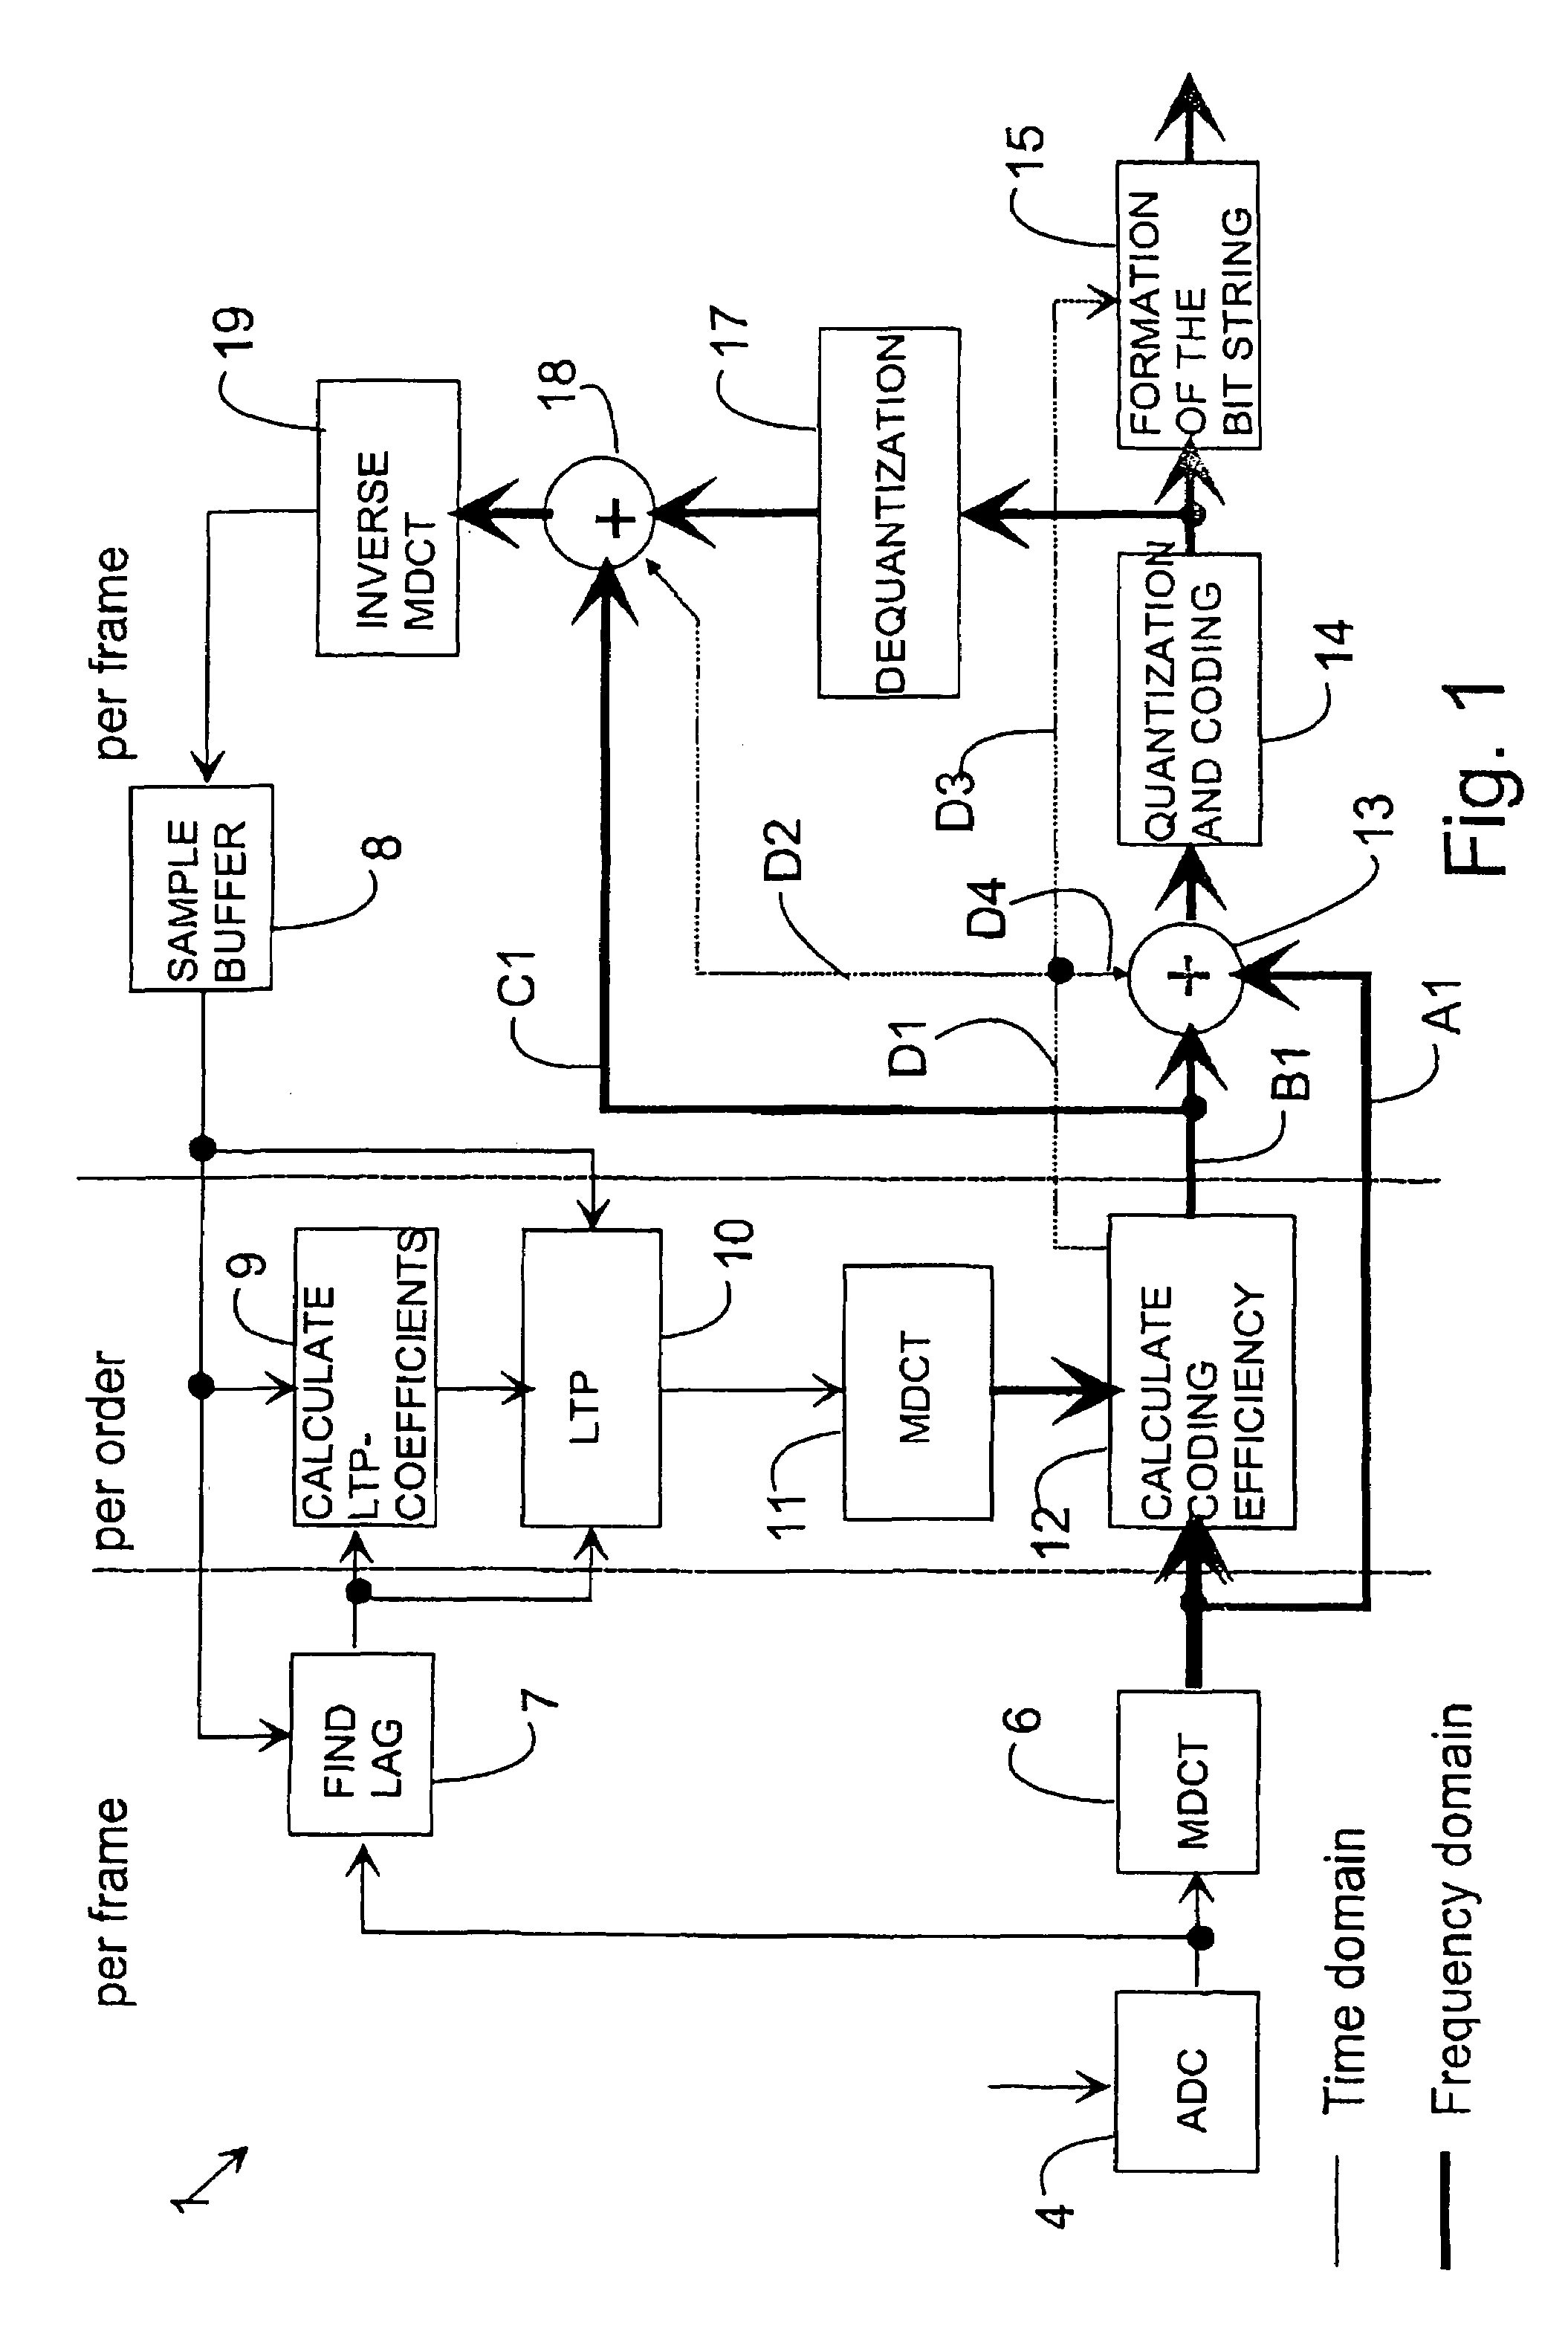 Method for improving the coding efficiency of an audio signal